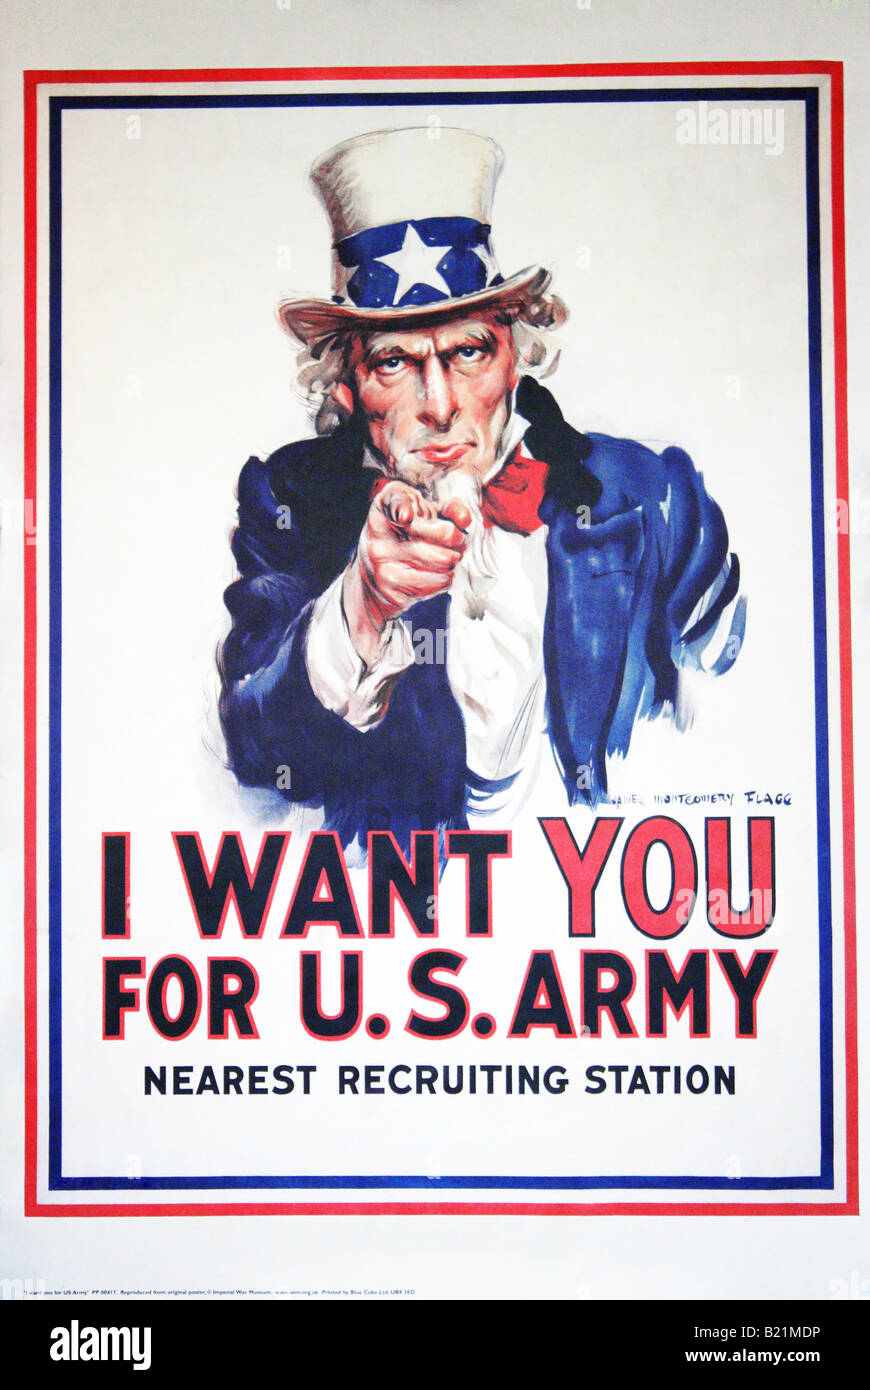 A photograph of the famous 'Uncle Sam' poster 'I want you for the U.S. army' used for recruiting. Stock Photo